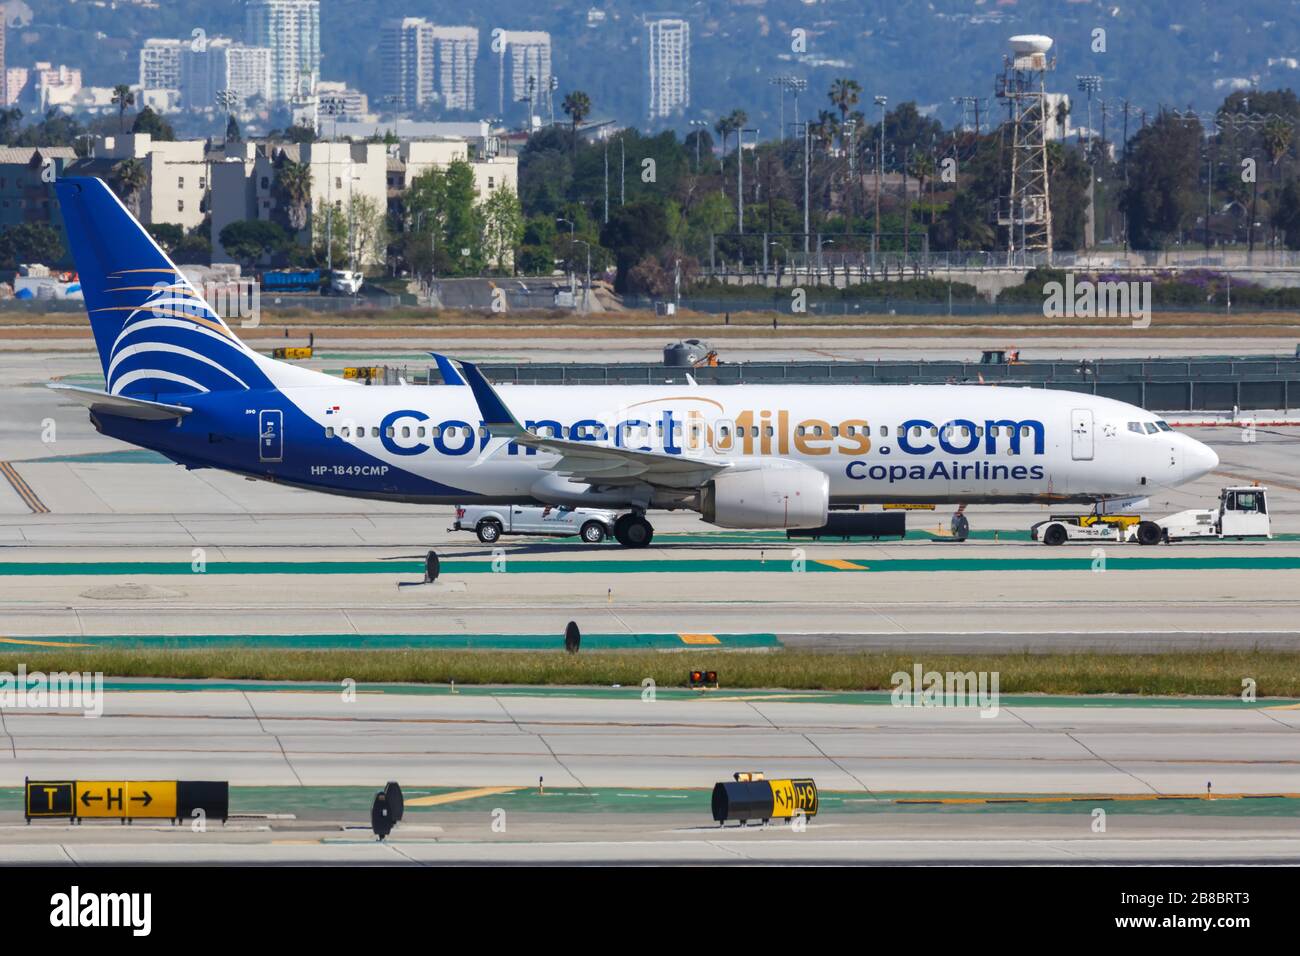 Los Angeles California April 12 19 Copa Airlines Boeing 737 800 Airplane At Los Angeles International Airport Lax In California Stock Photo Alamy